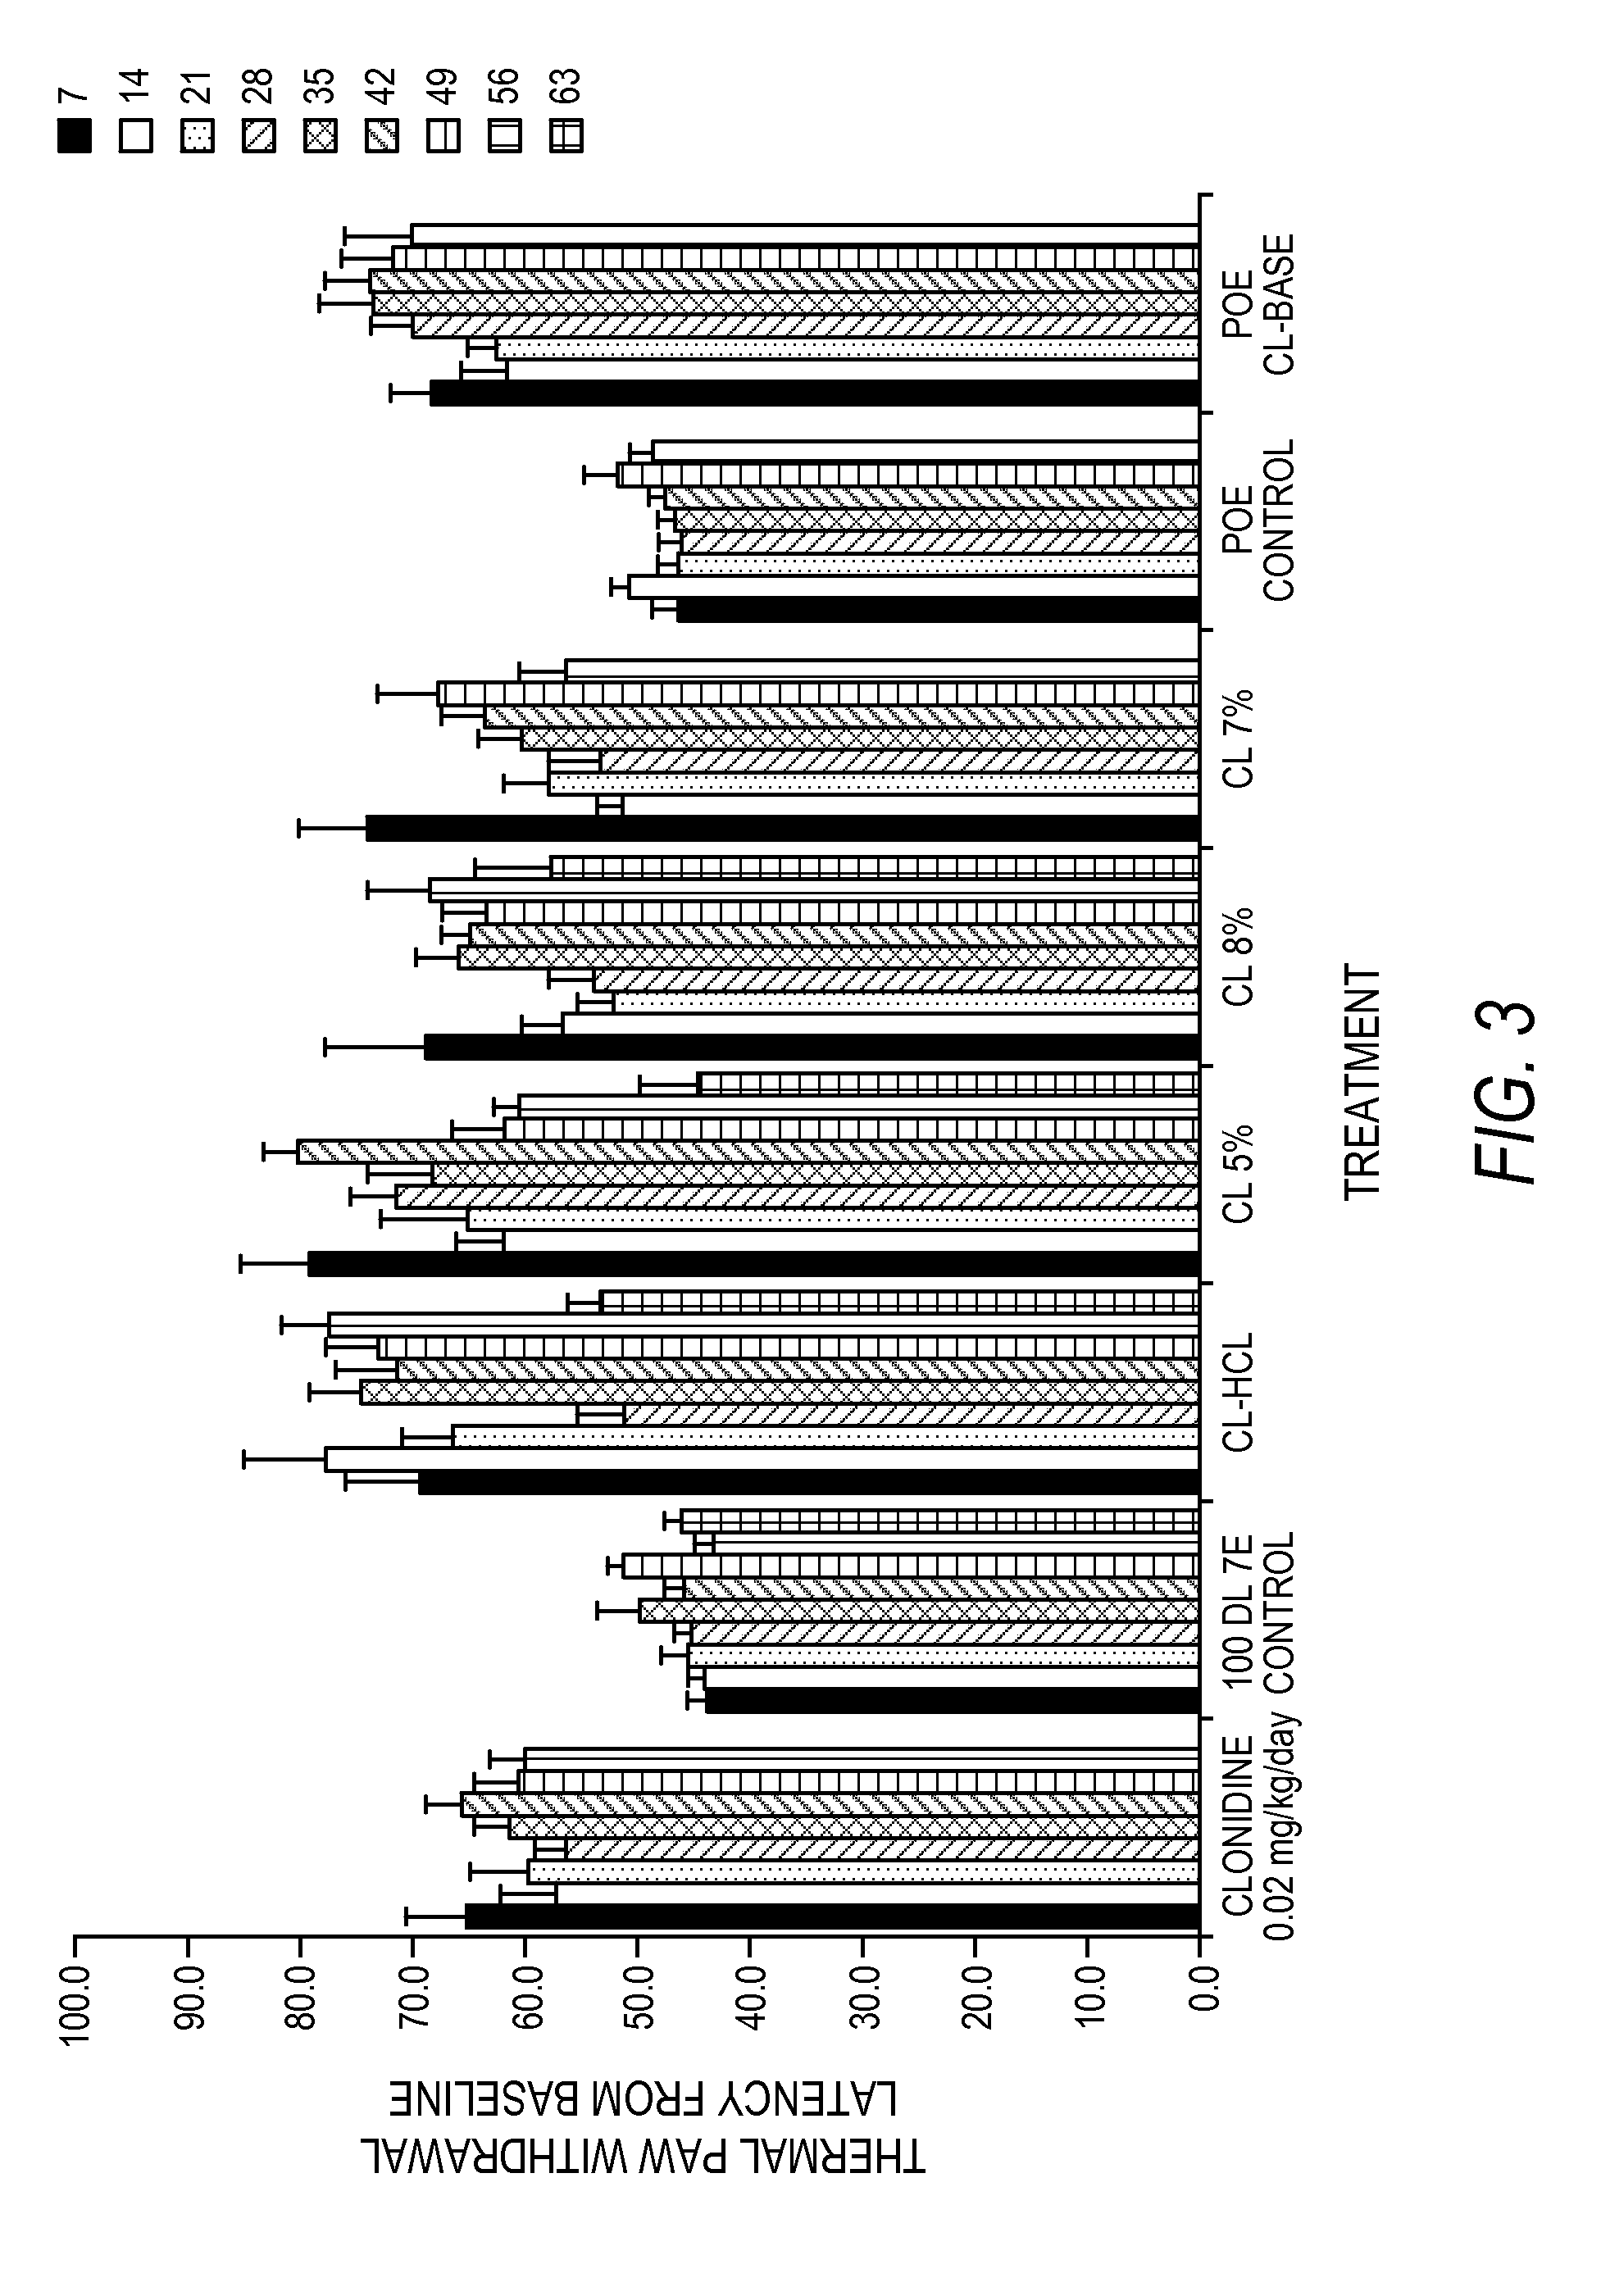 Methods for treating conditions such as dystonia and post-stroke spasticity with clonidine